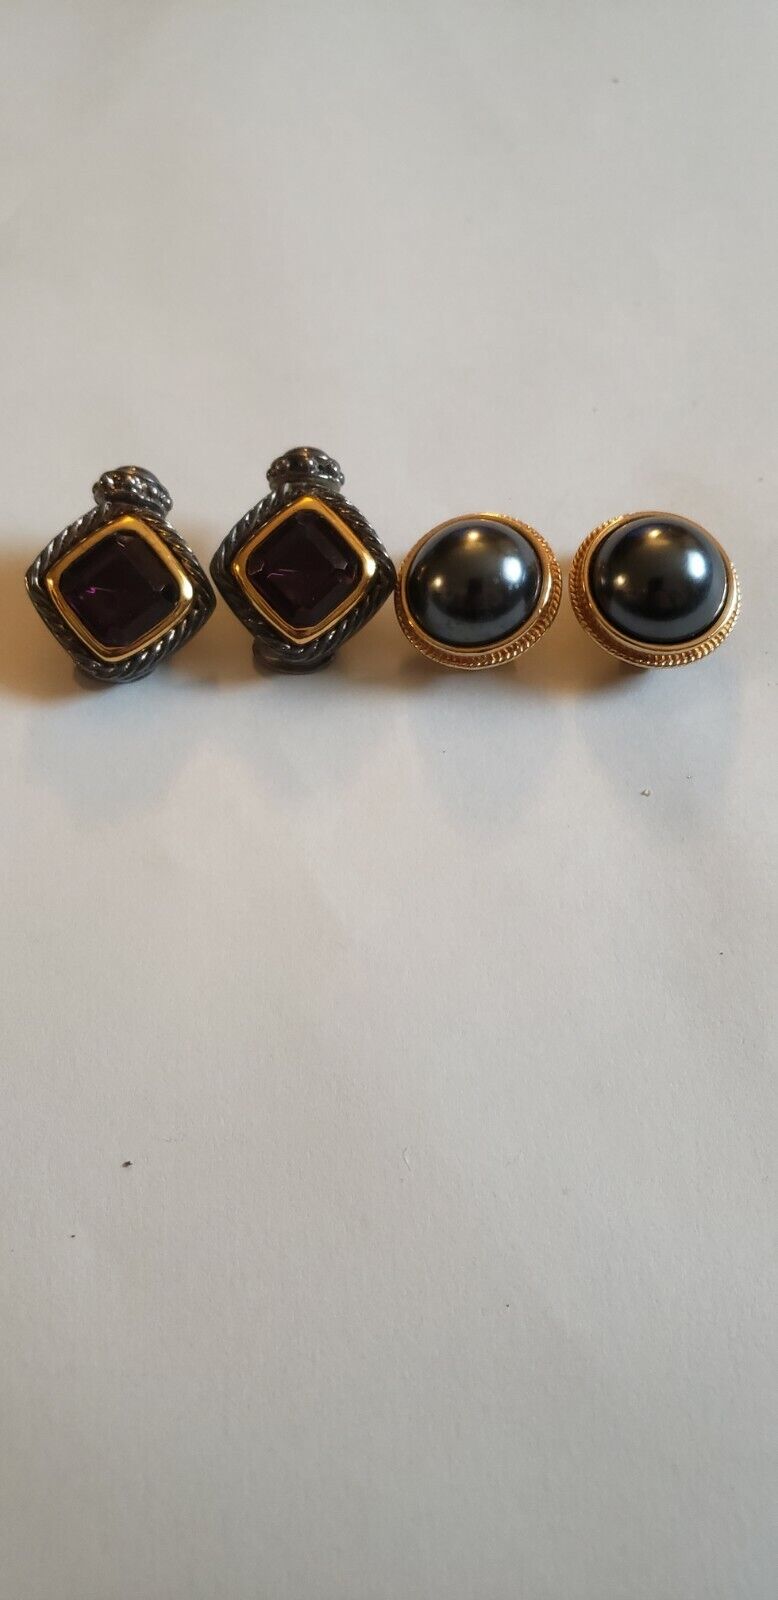 Giovanni Clip On Earrings marked Gio and CAROLEE clip on vintage earrings. Giovanni